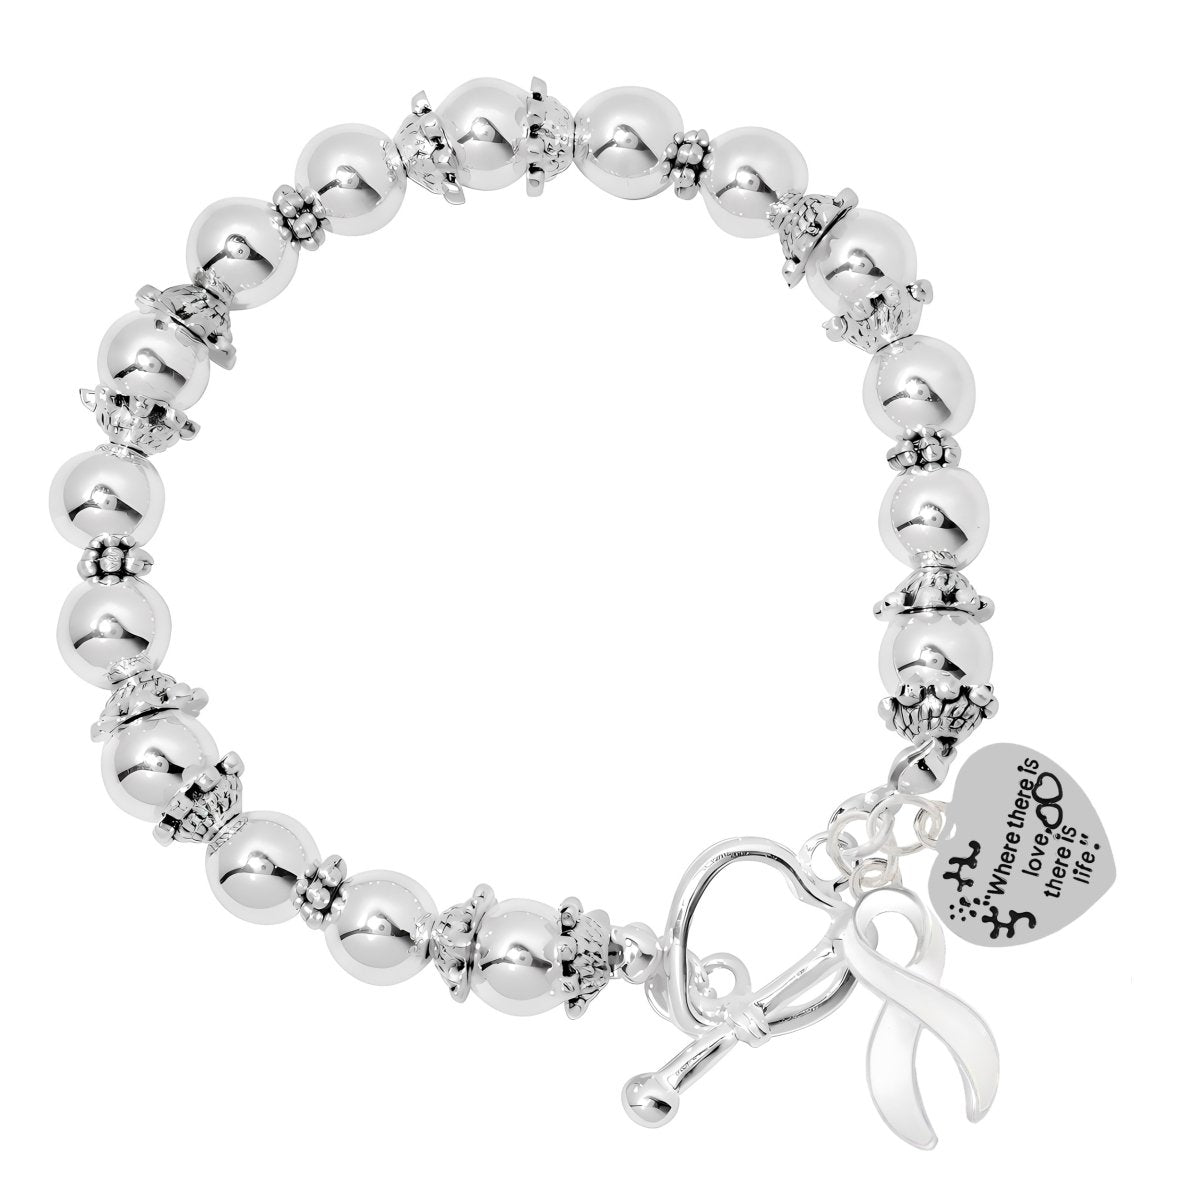 Where There is Love White Ribbon Bracelets - Fundraising For A Cause